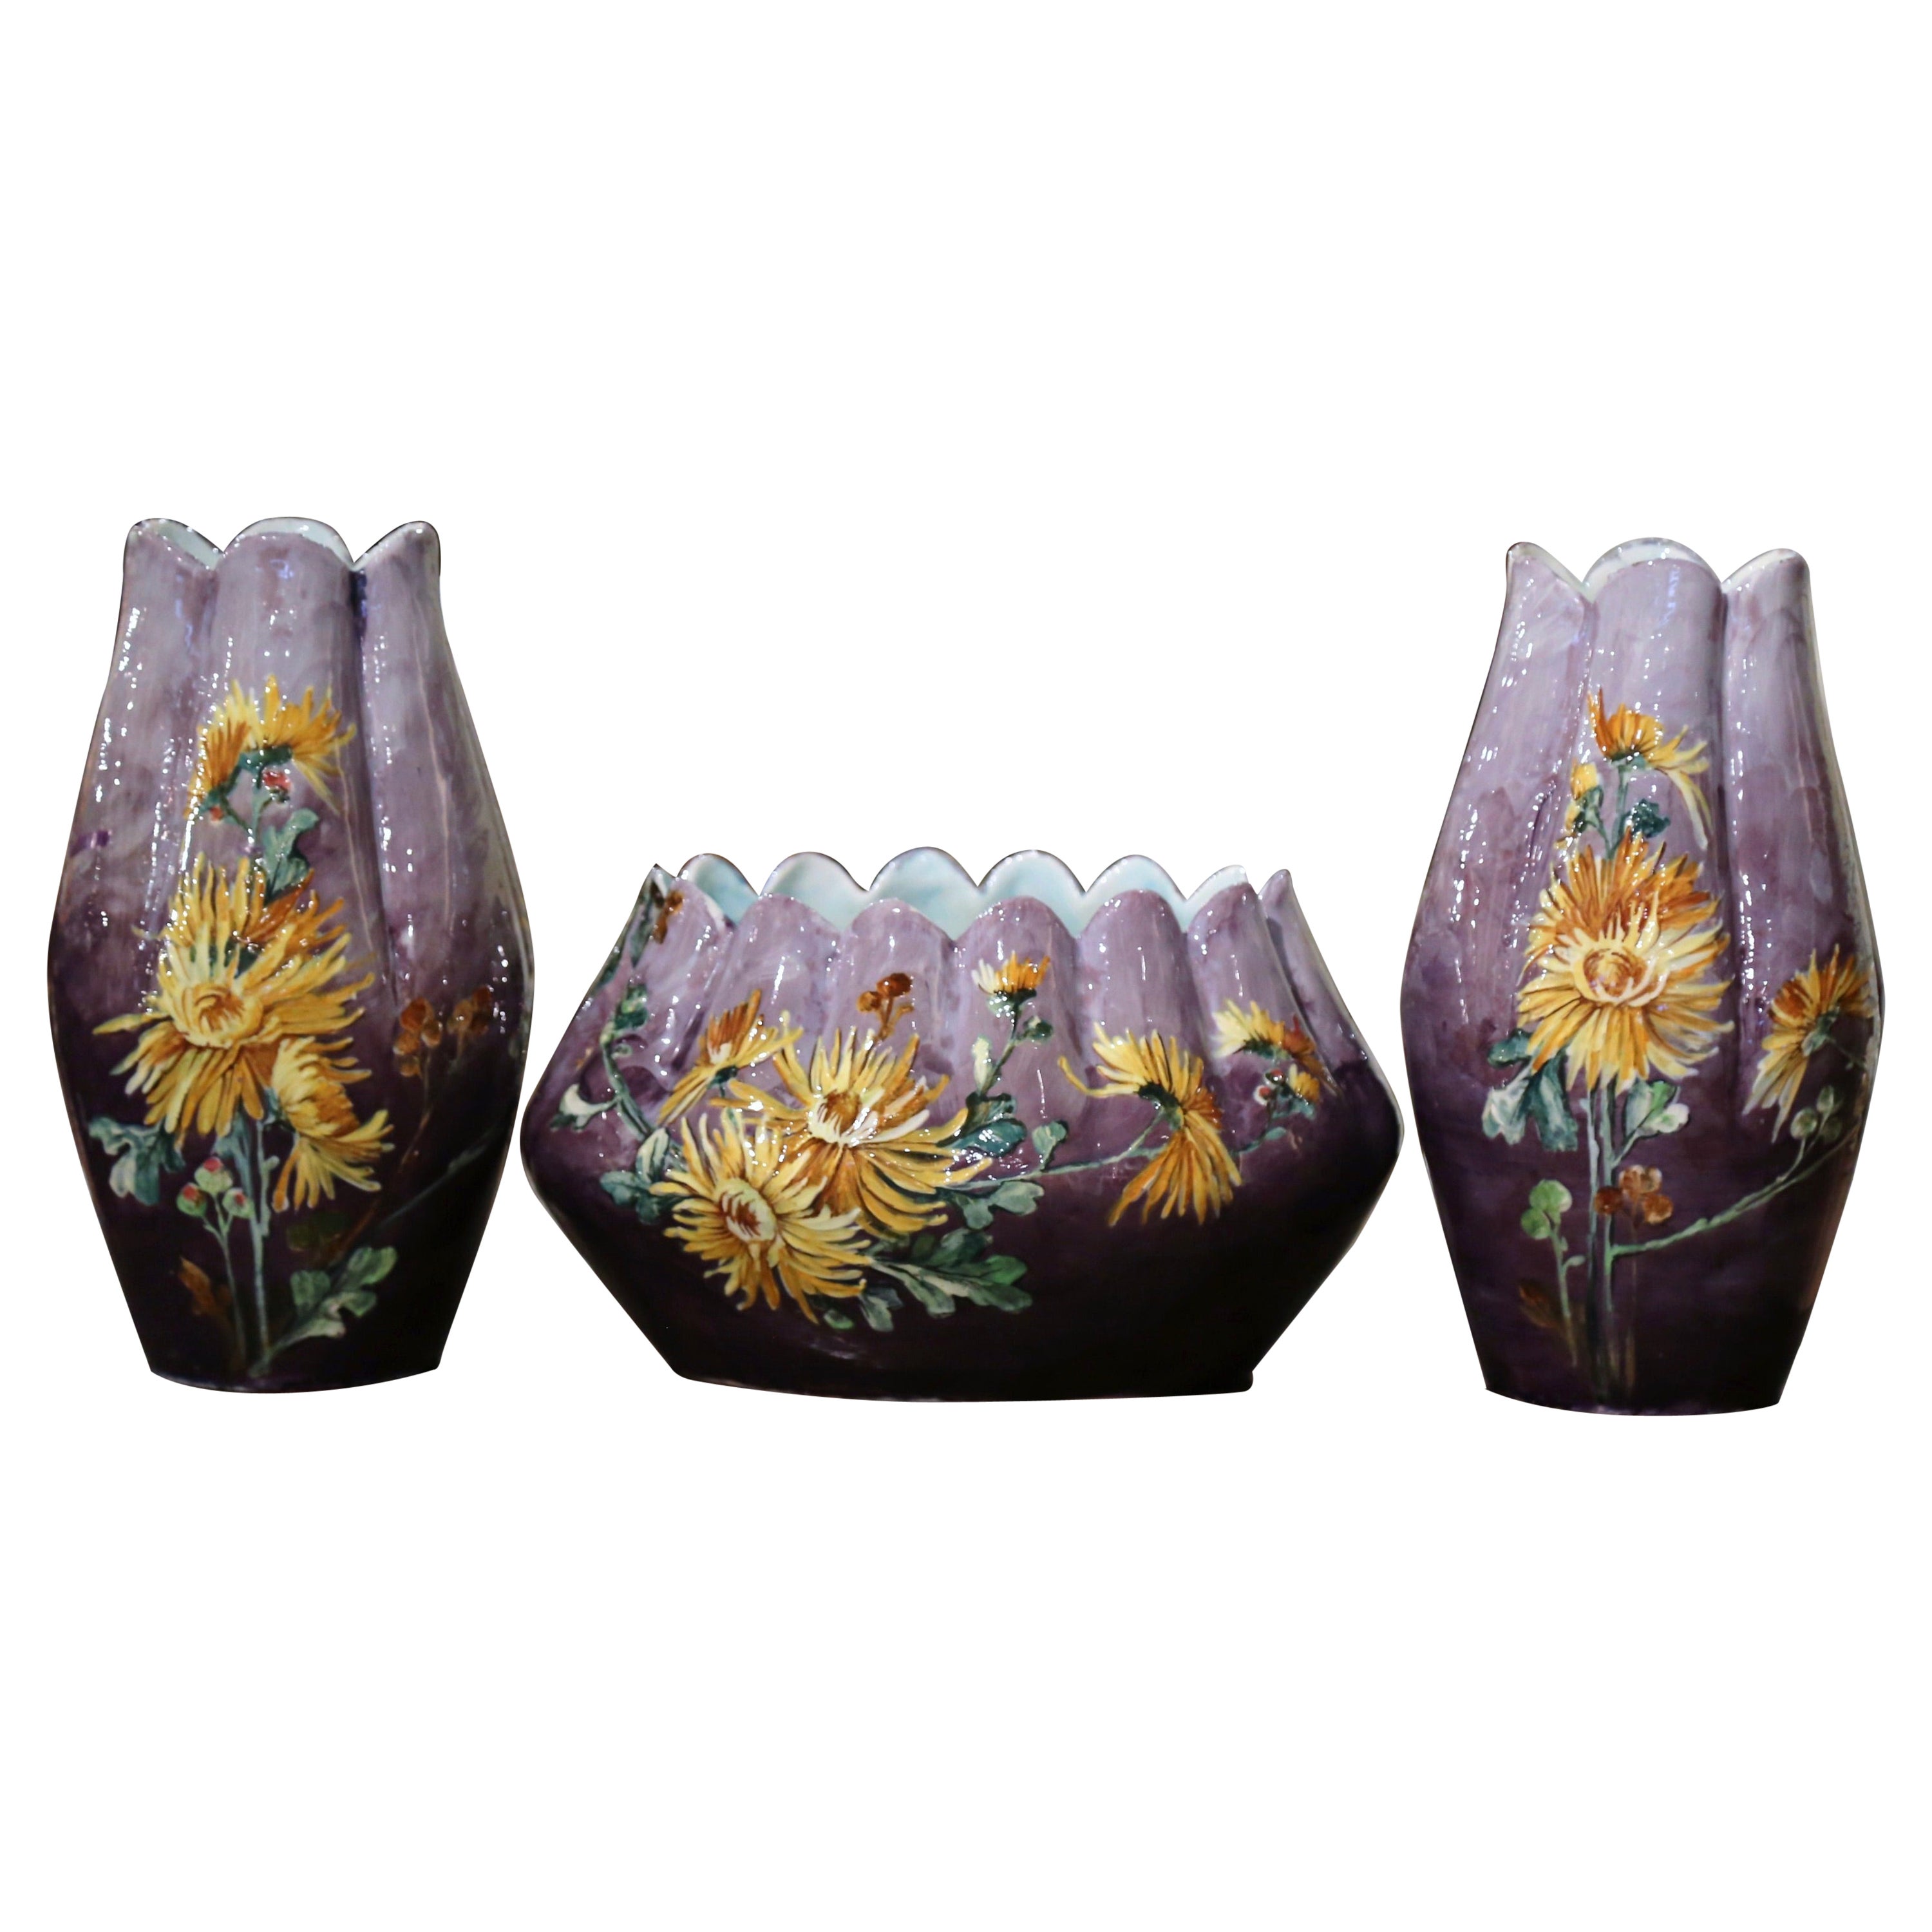 19th Century French Hand-Painted Barbotine Vases Signed P. Perret, Set of Three